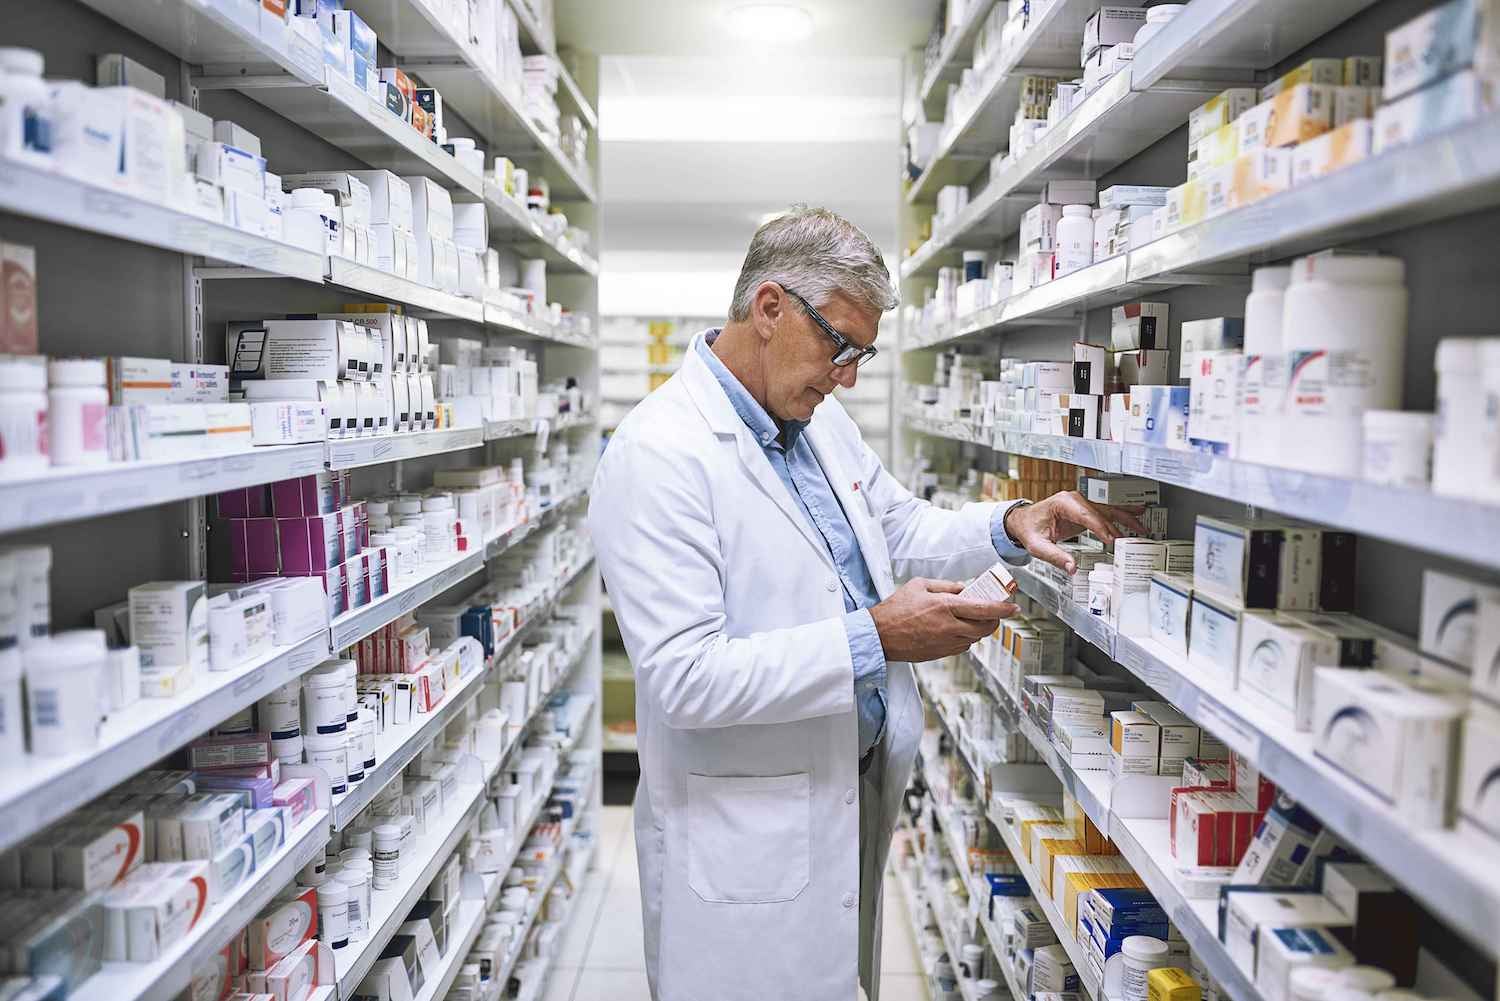 Medical employee examining products in a pharmacy setting